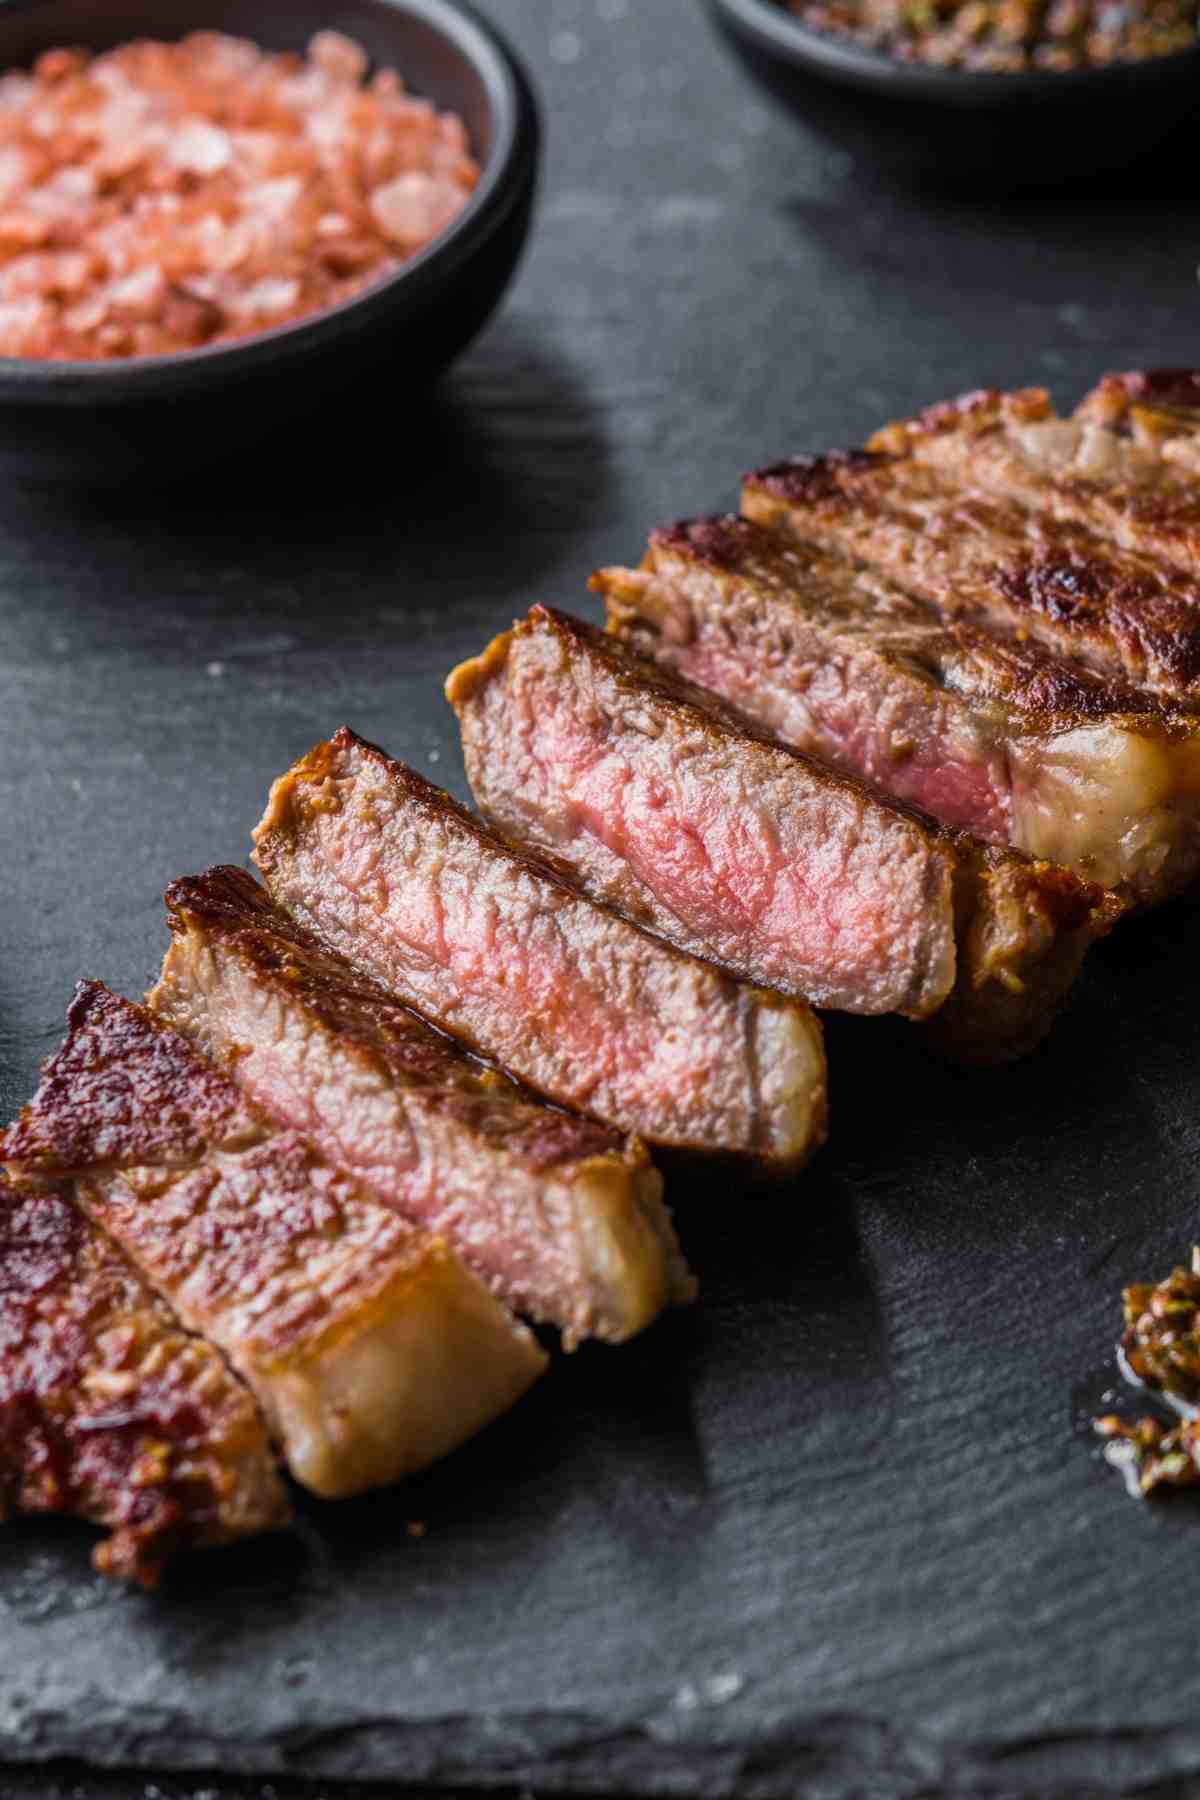 Sear these NY strip steaks in a cast iron skillet for a crust that’s perfectly caramelized. They take about 15 minutes to cook and the recipe includes guidelines on how to cook them to your liking.